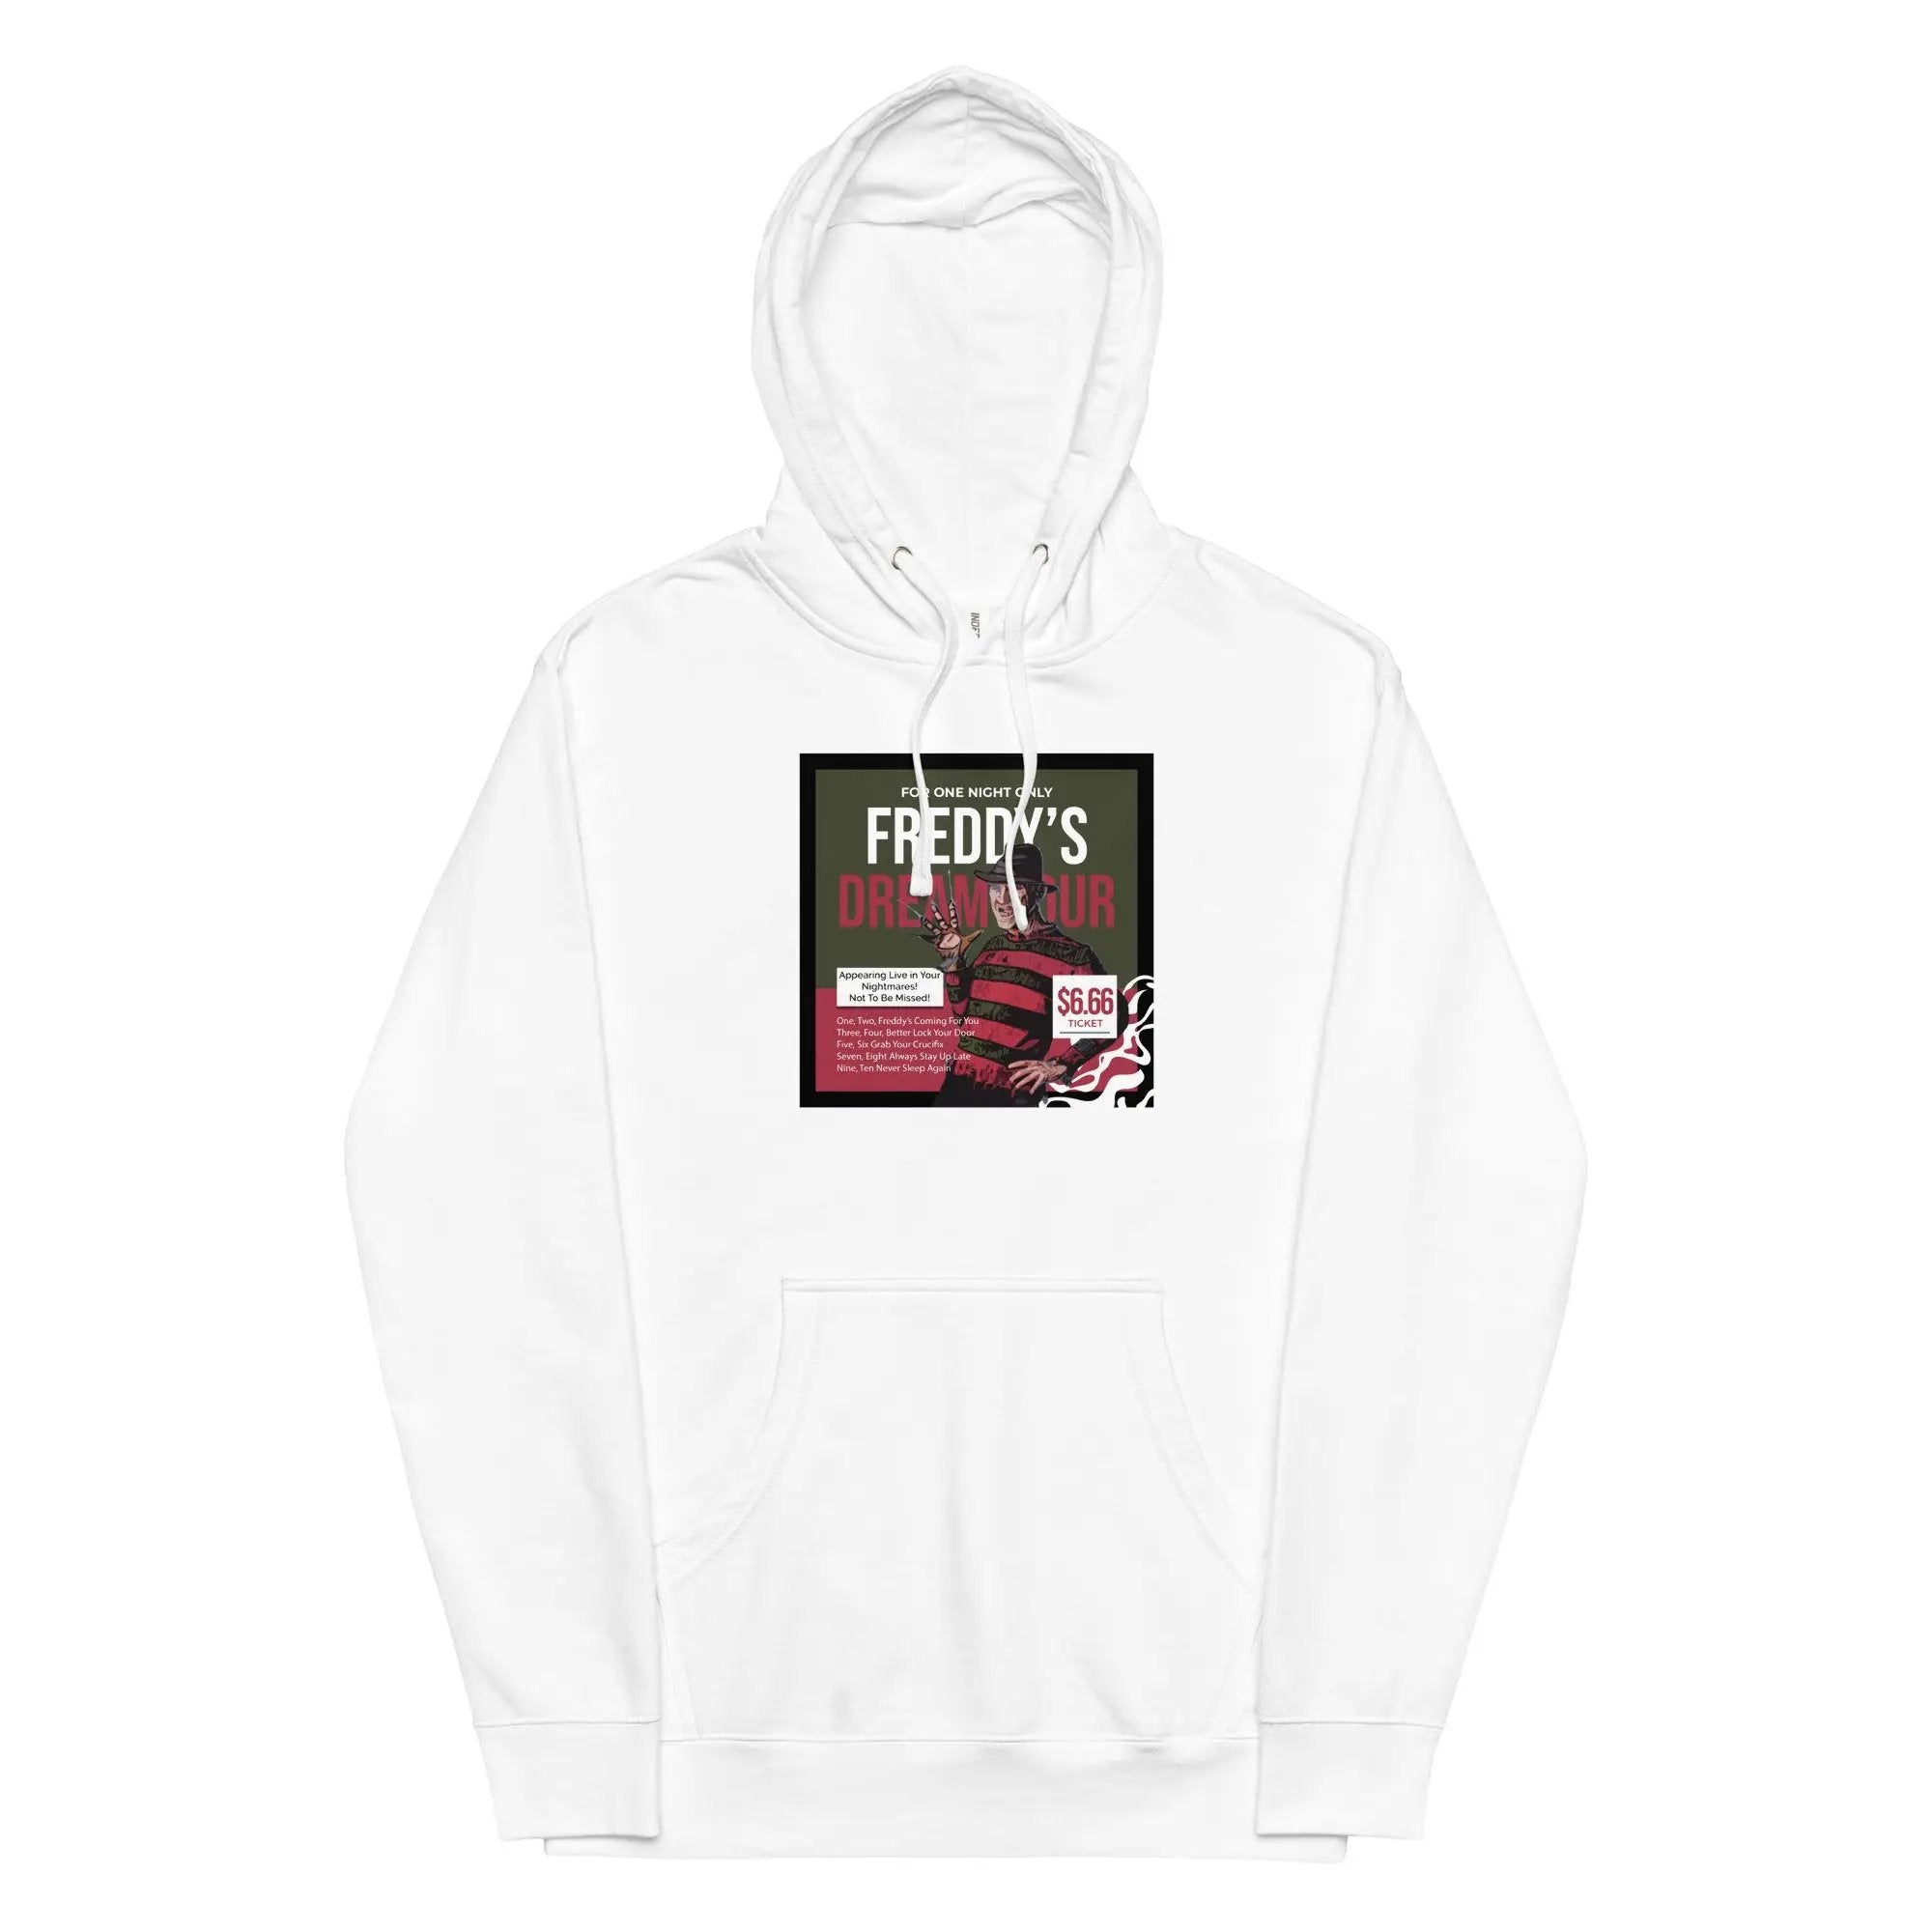 Freddy's Dream Tour Unisex midweight hoodie